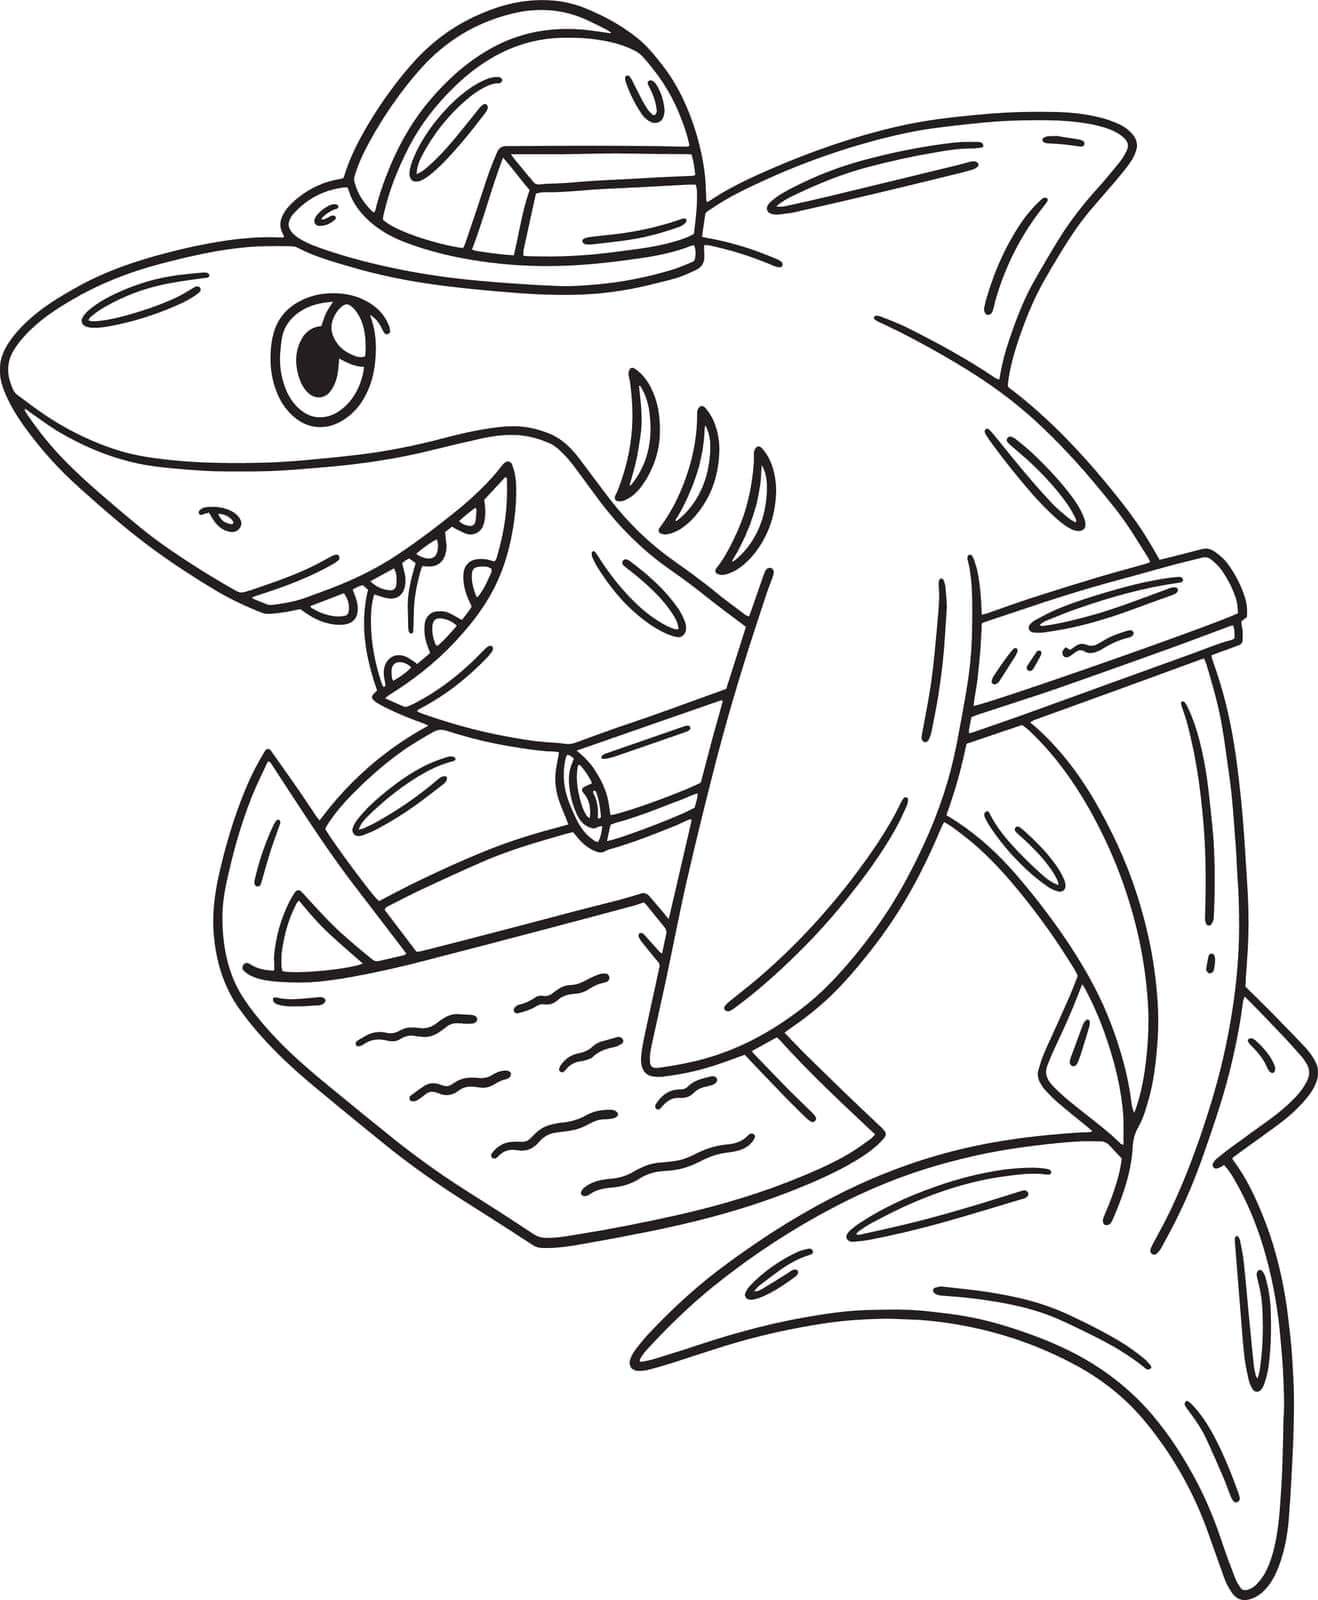 Engineer Shark Isolated Coloring Page for Kids by abbydesign